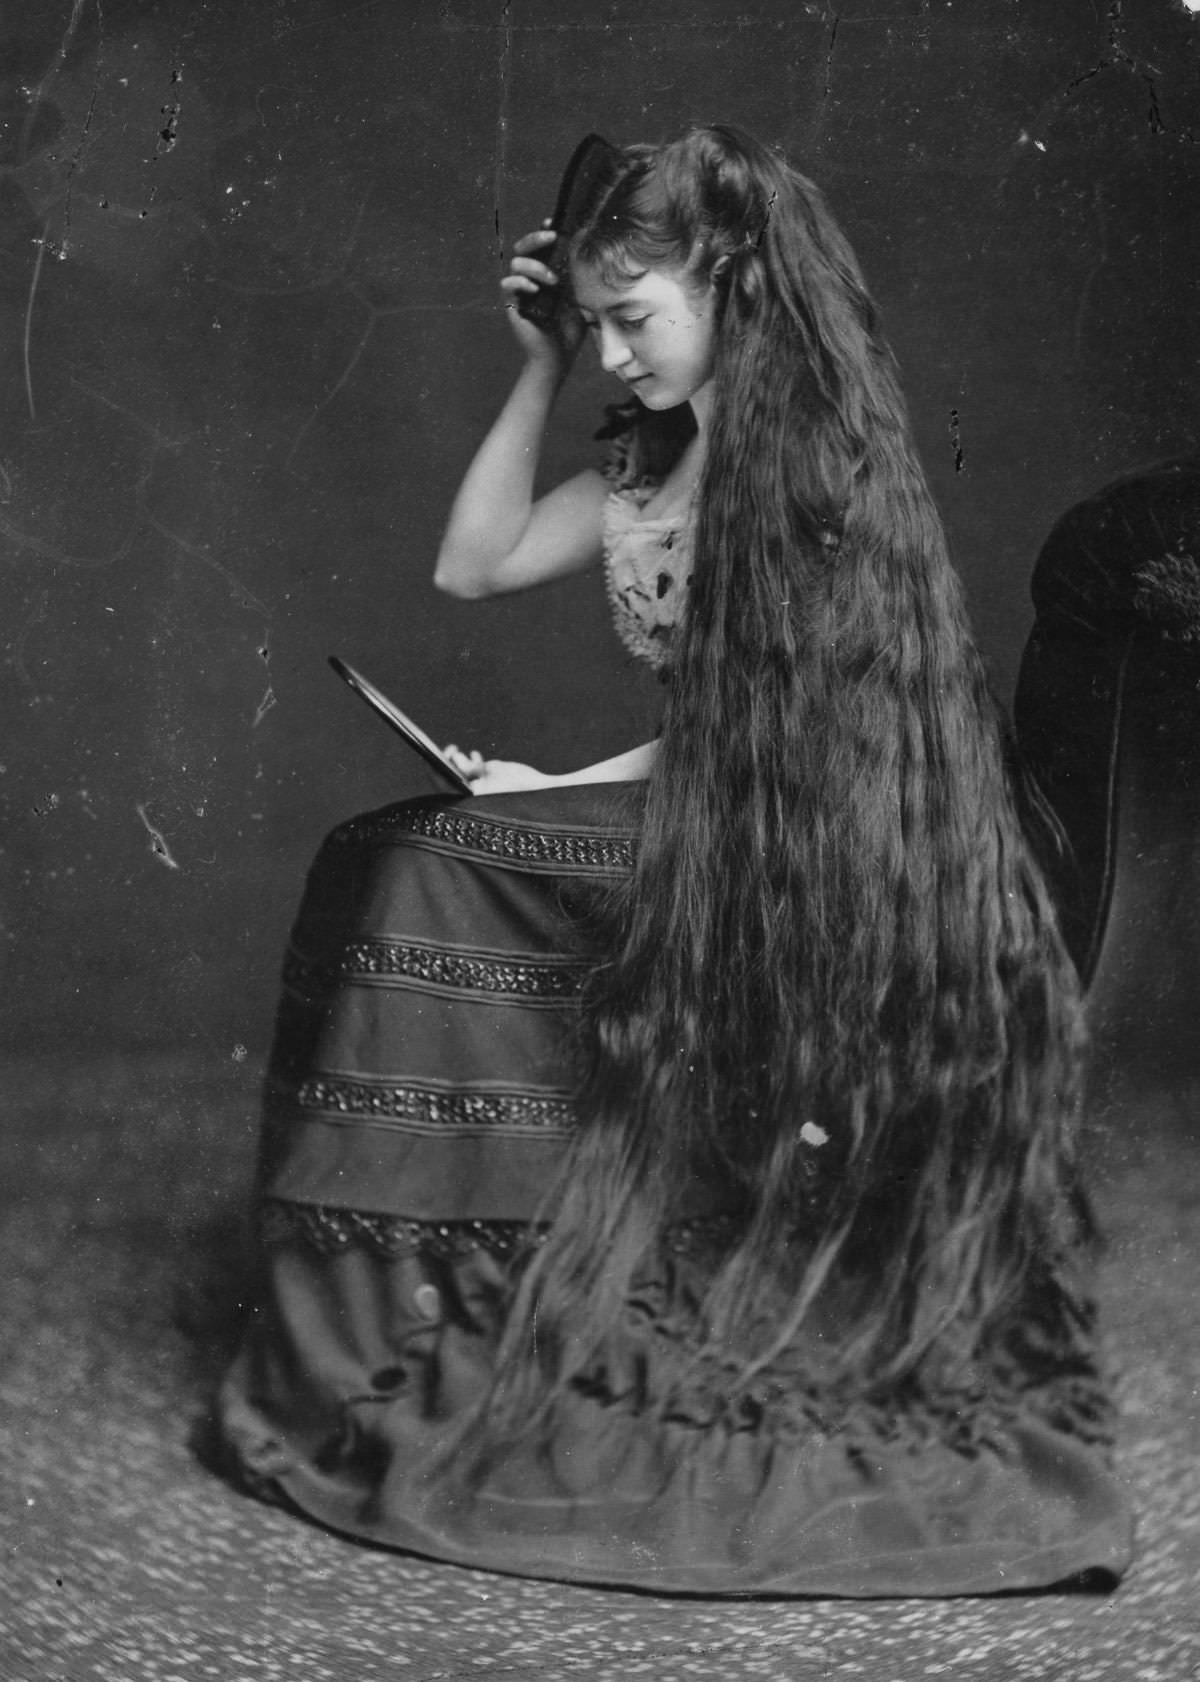 A young unknown model brushes her long hair in 1894.